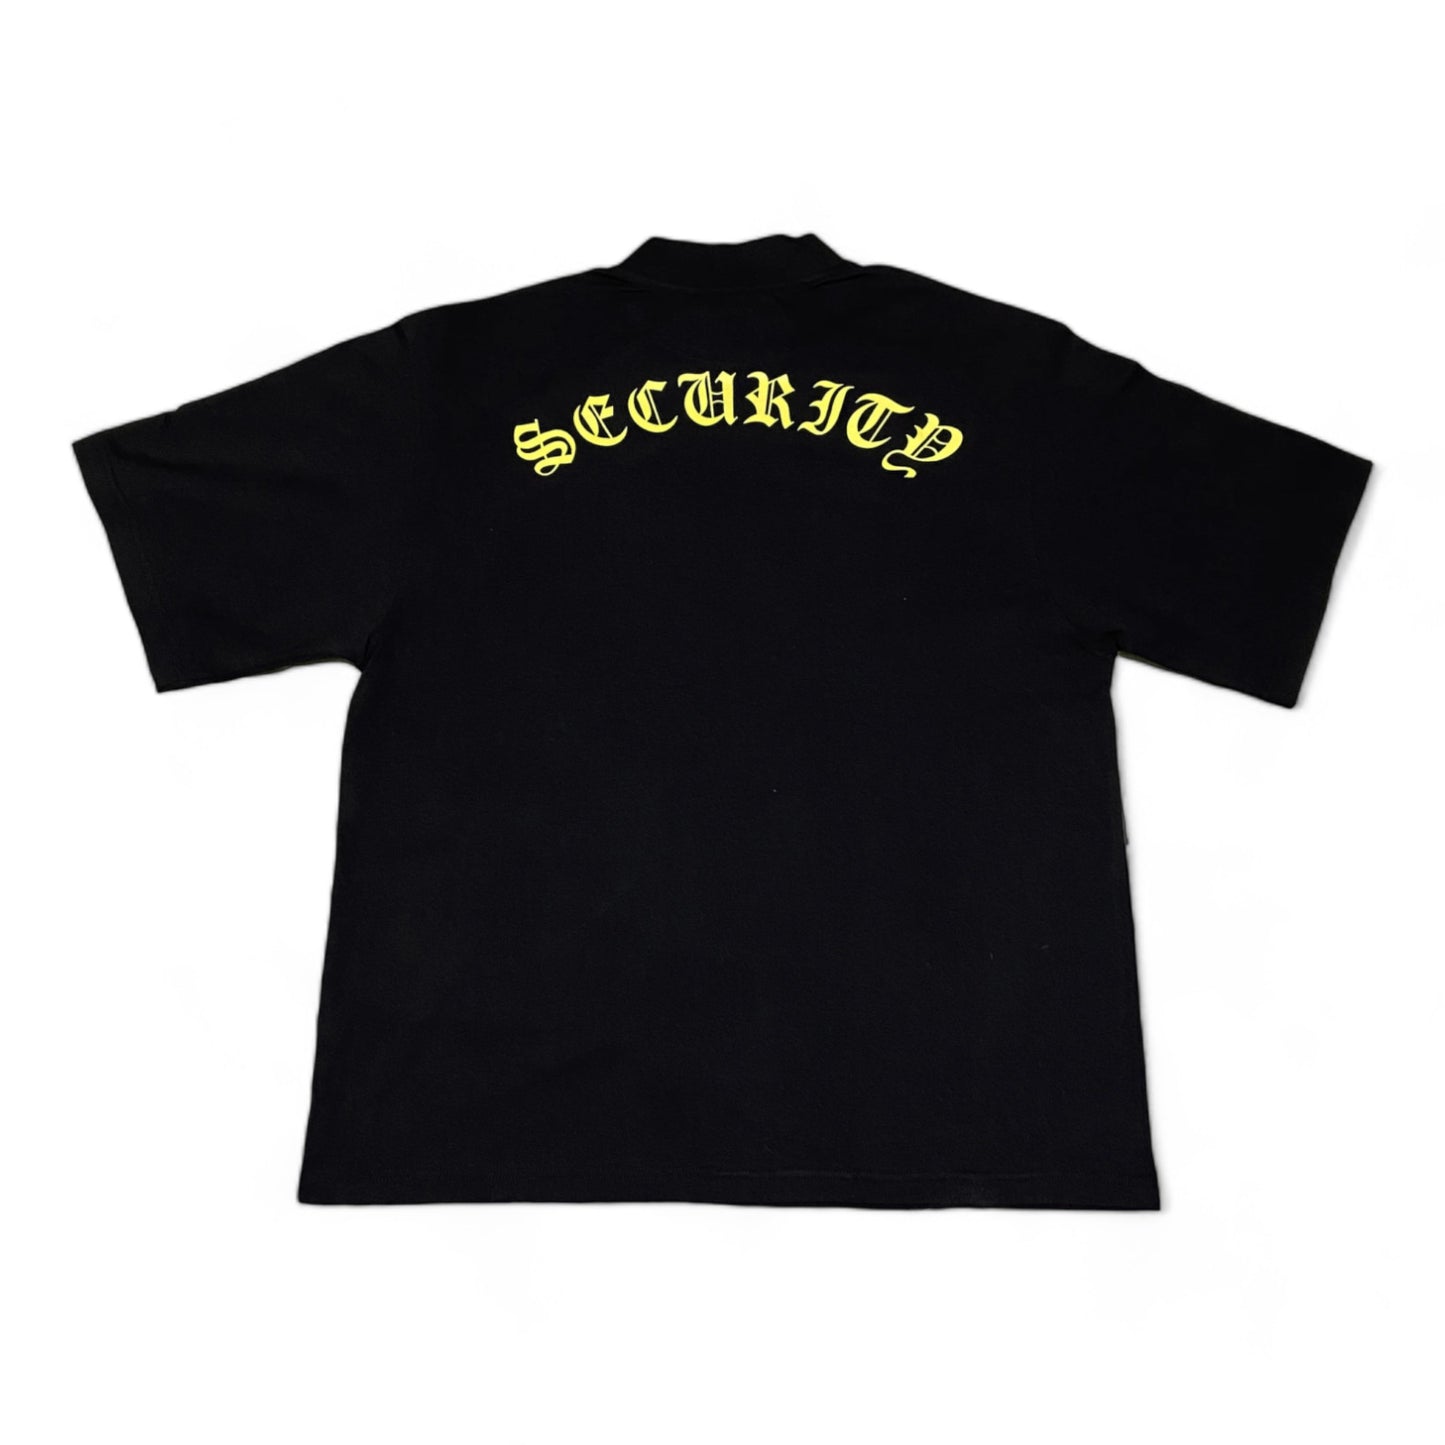 UPPERLANCE X NOFLASH IN-SECURITY T-SHIRT